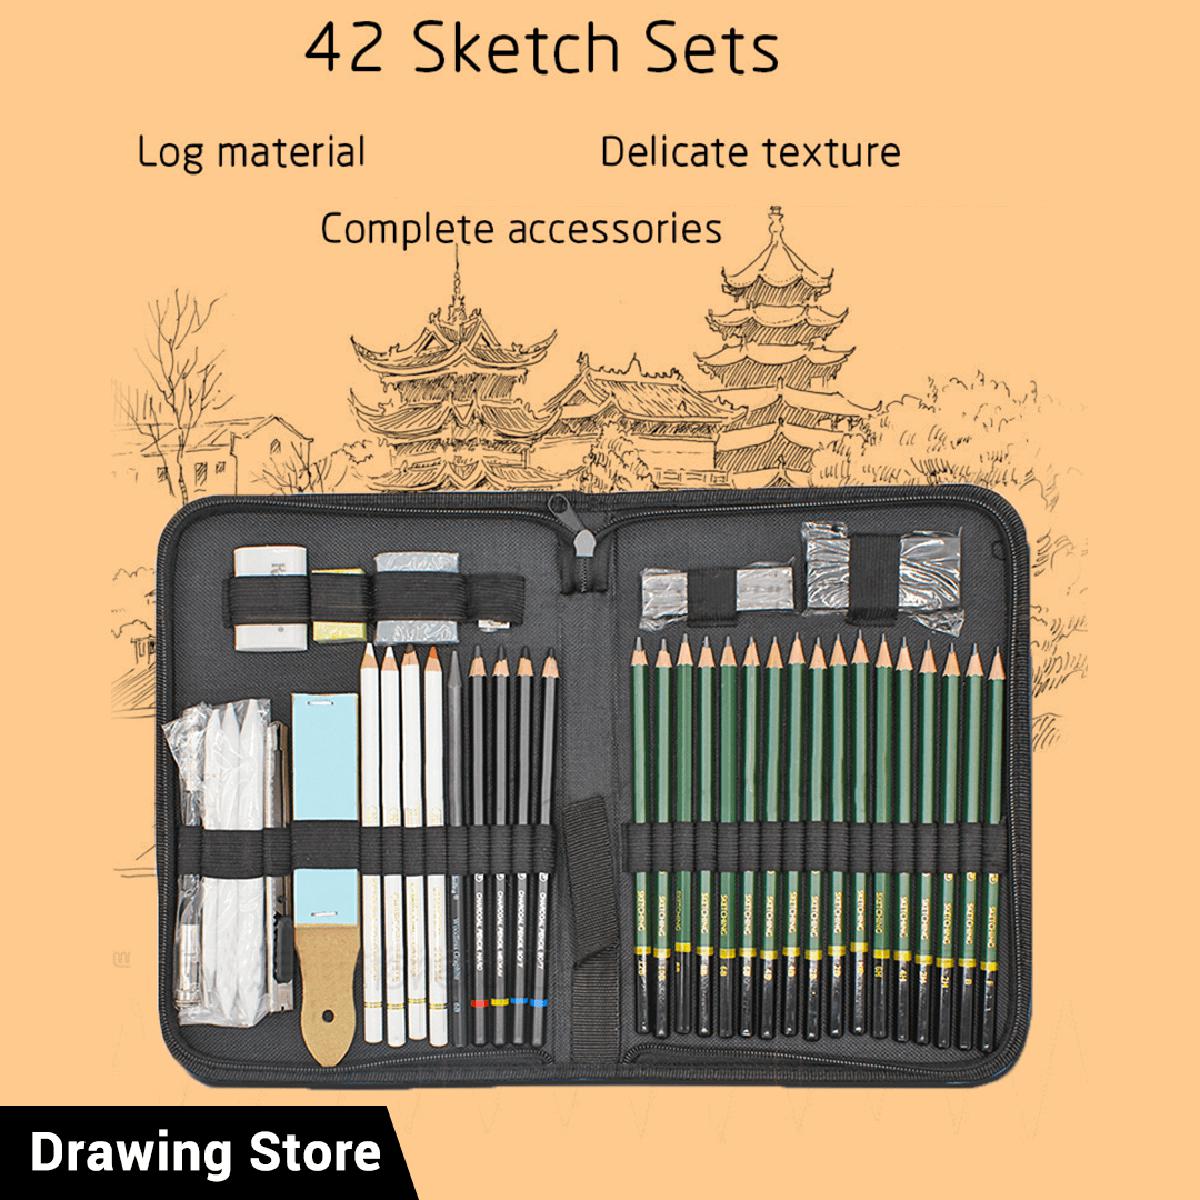 U.S. Art Supply 44-Piece Drawing & Sketching Art Set with 4 Sketch Pads  (242 Paper Sheets) - Professional Artist Kit, Graphite, Charcoal, Pastel  Pencils & Sticks, Erasers - Pop-Up Carry Case, Student - Walmart.com